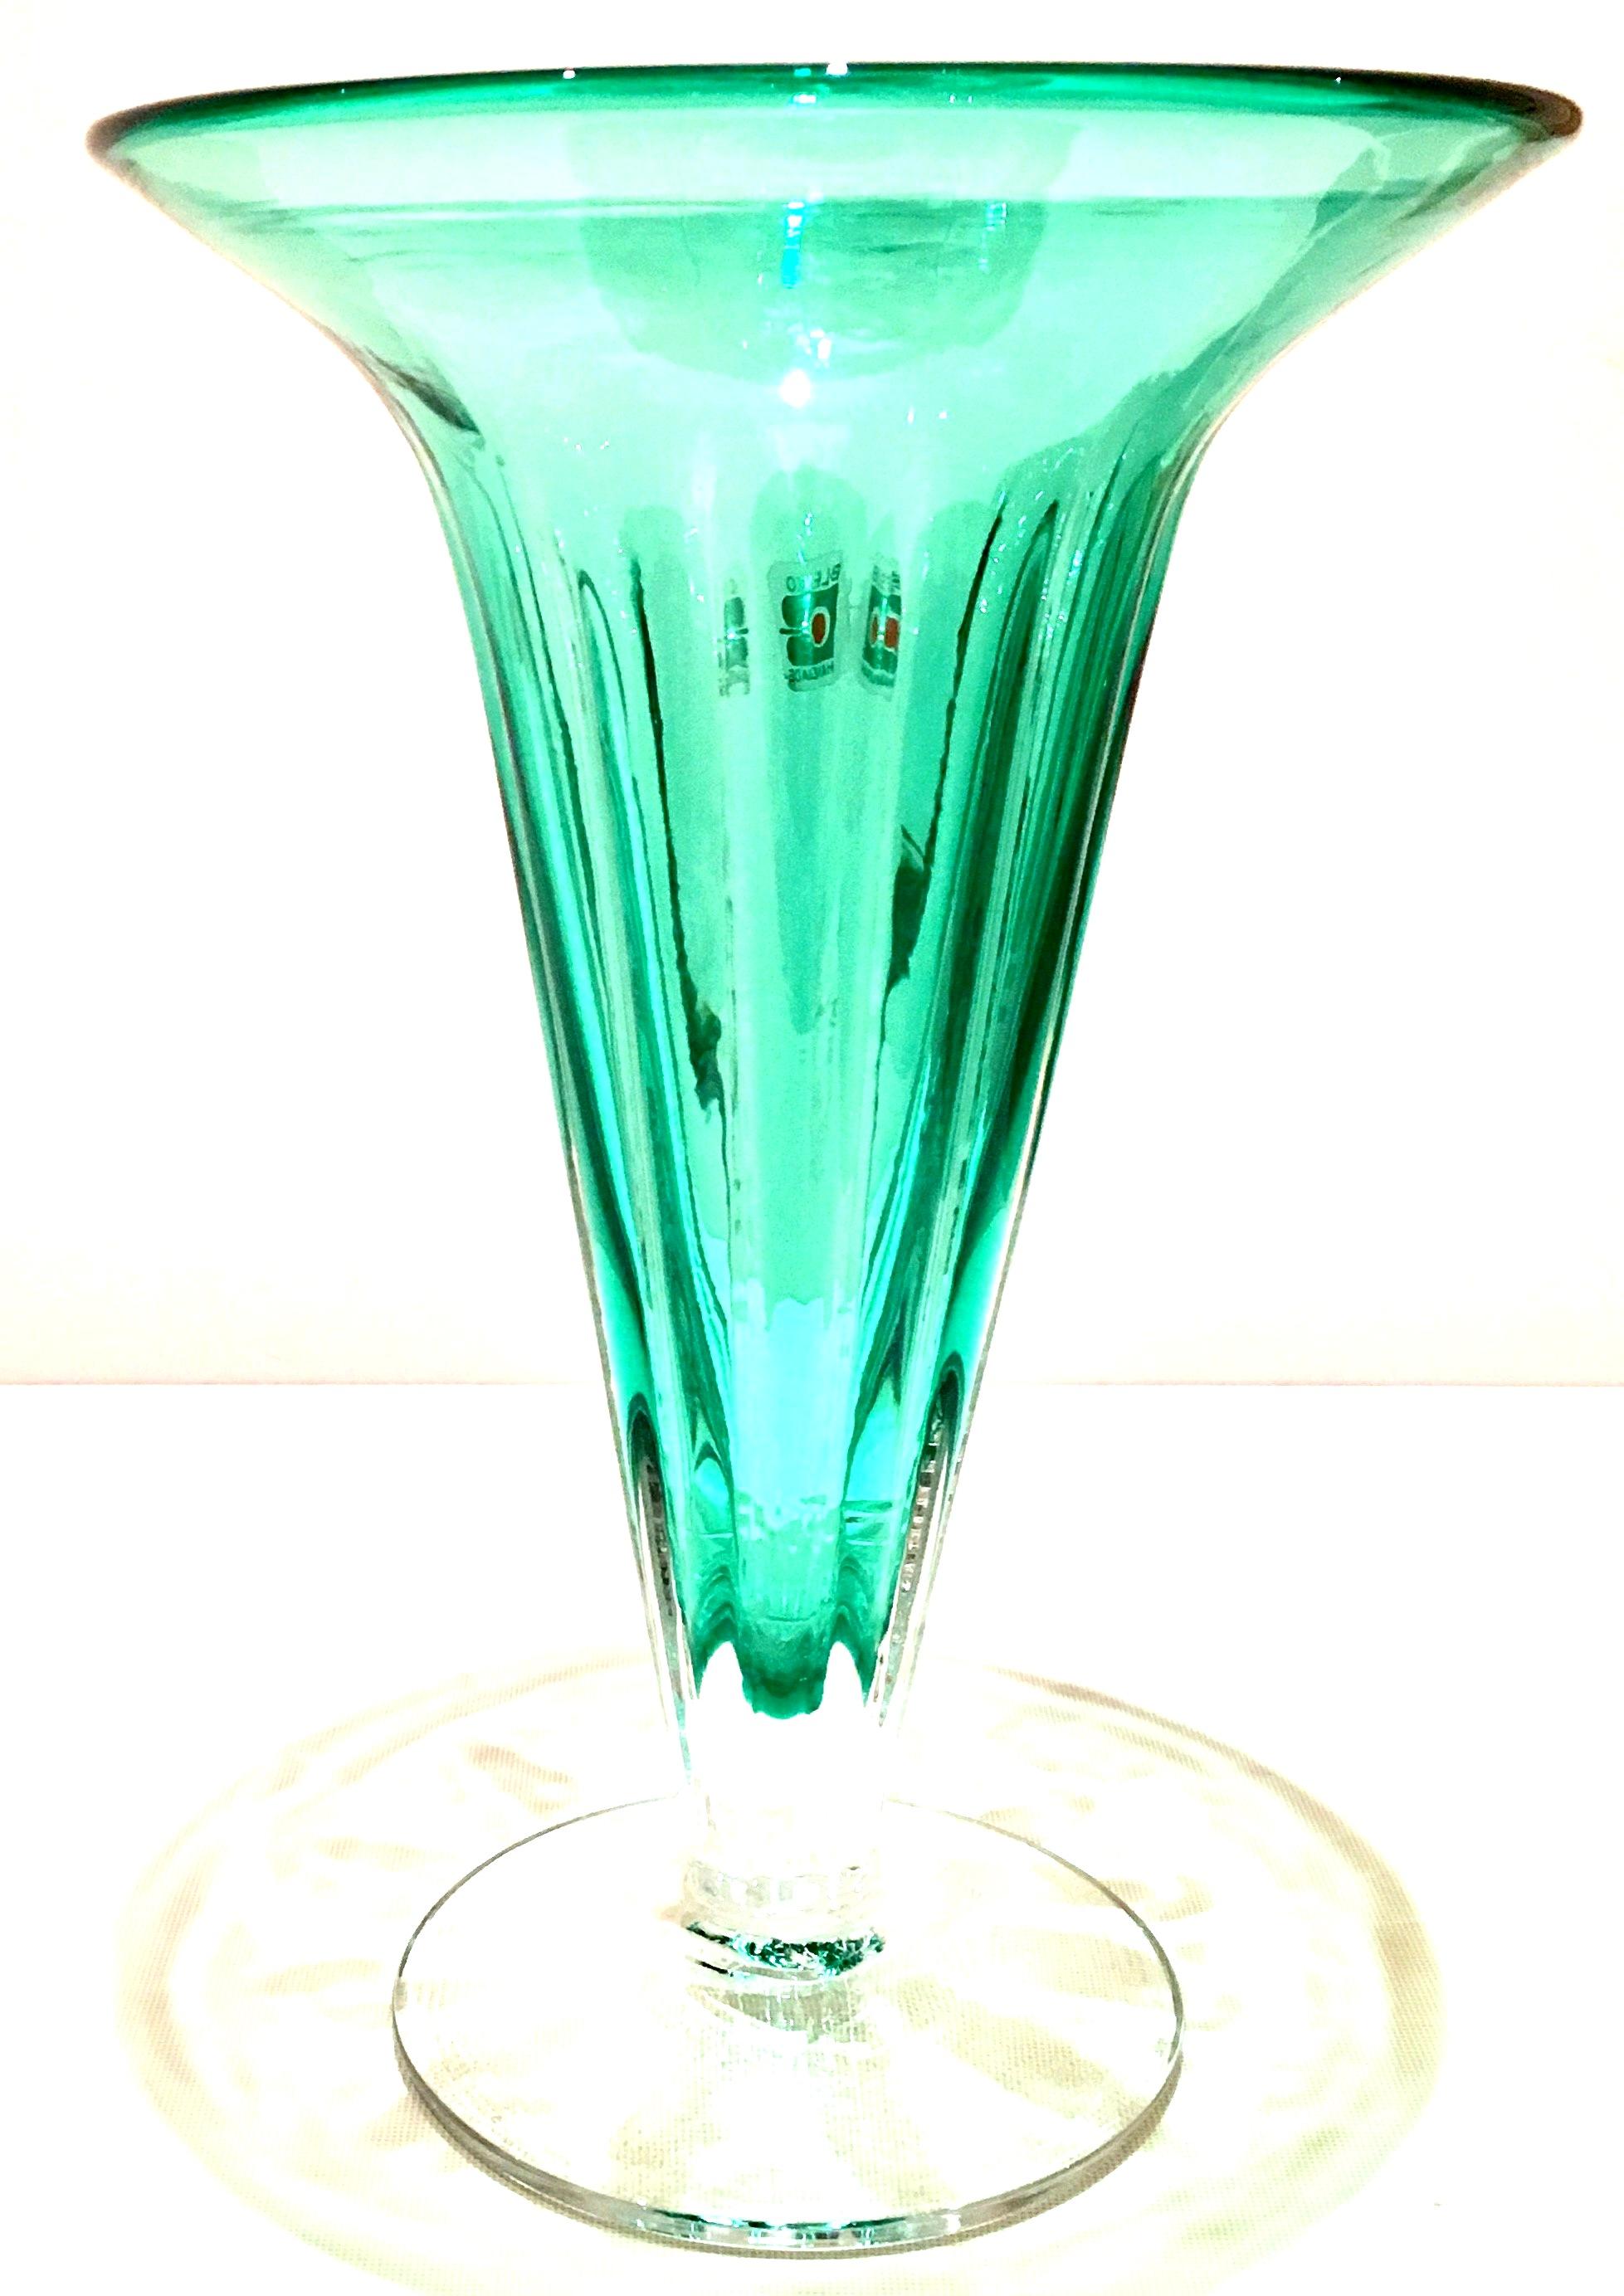 1980s American blown art glass aqua and translucent ribbed and fluted footed vase by Blenko glass. Original Blenko glass manufacturer sticker in tact, indicating 1980-1999 production.